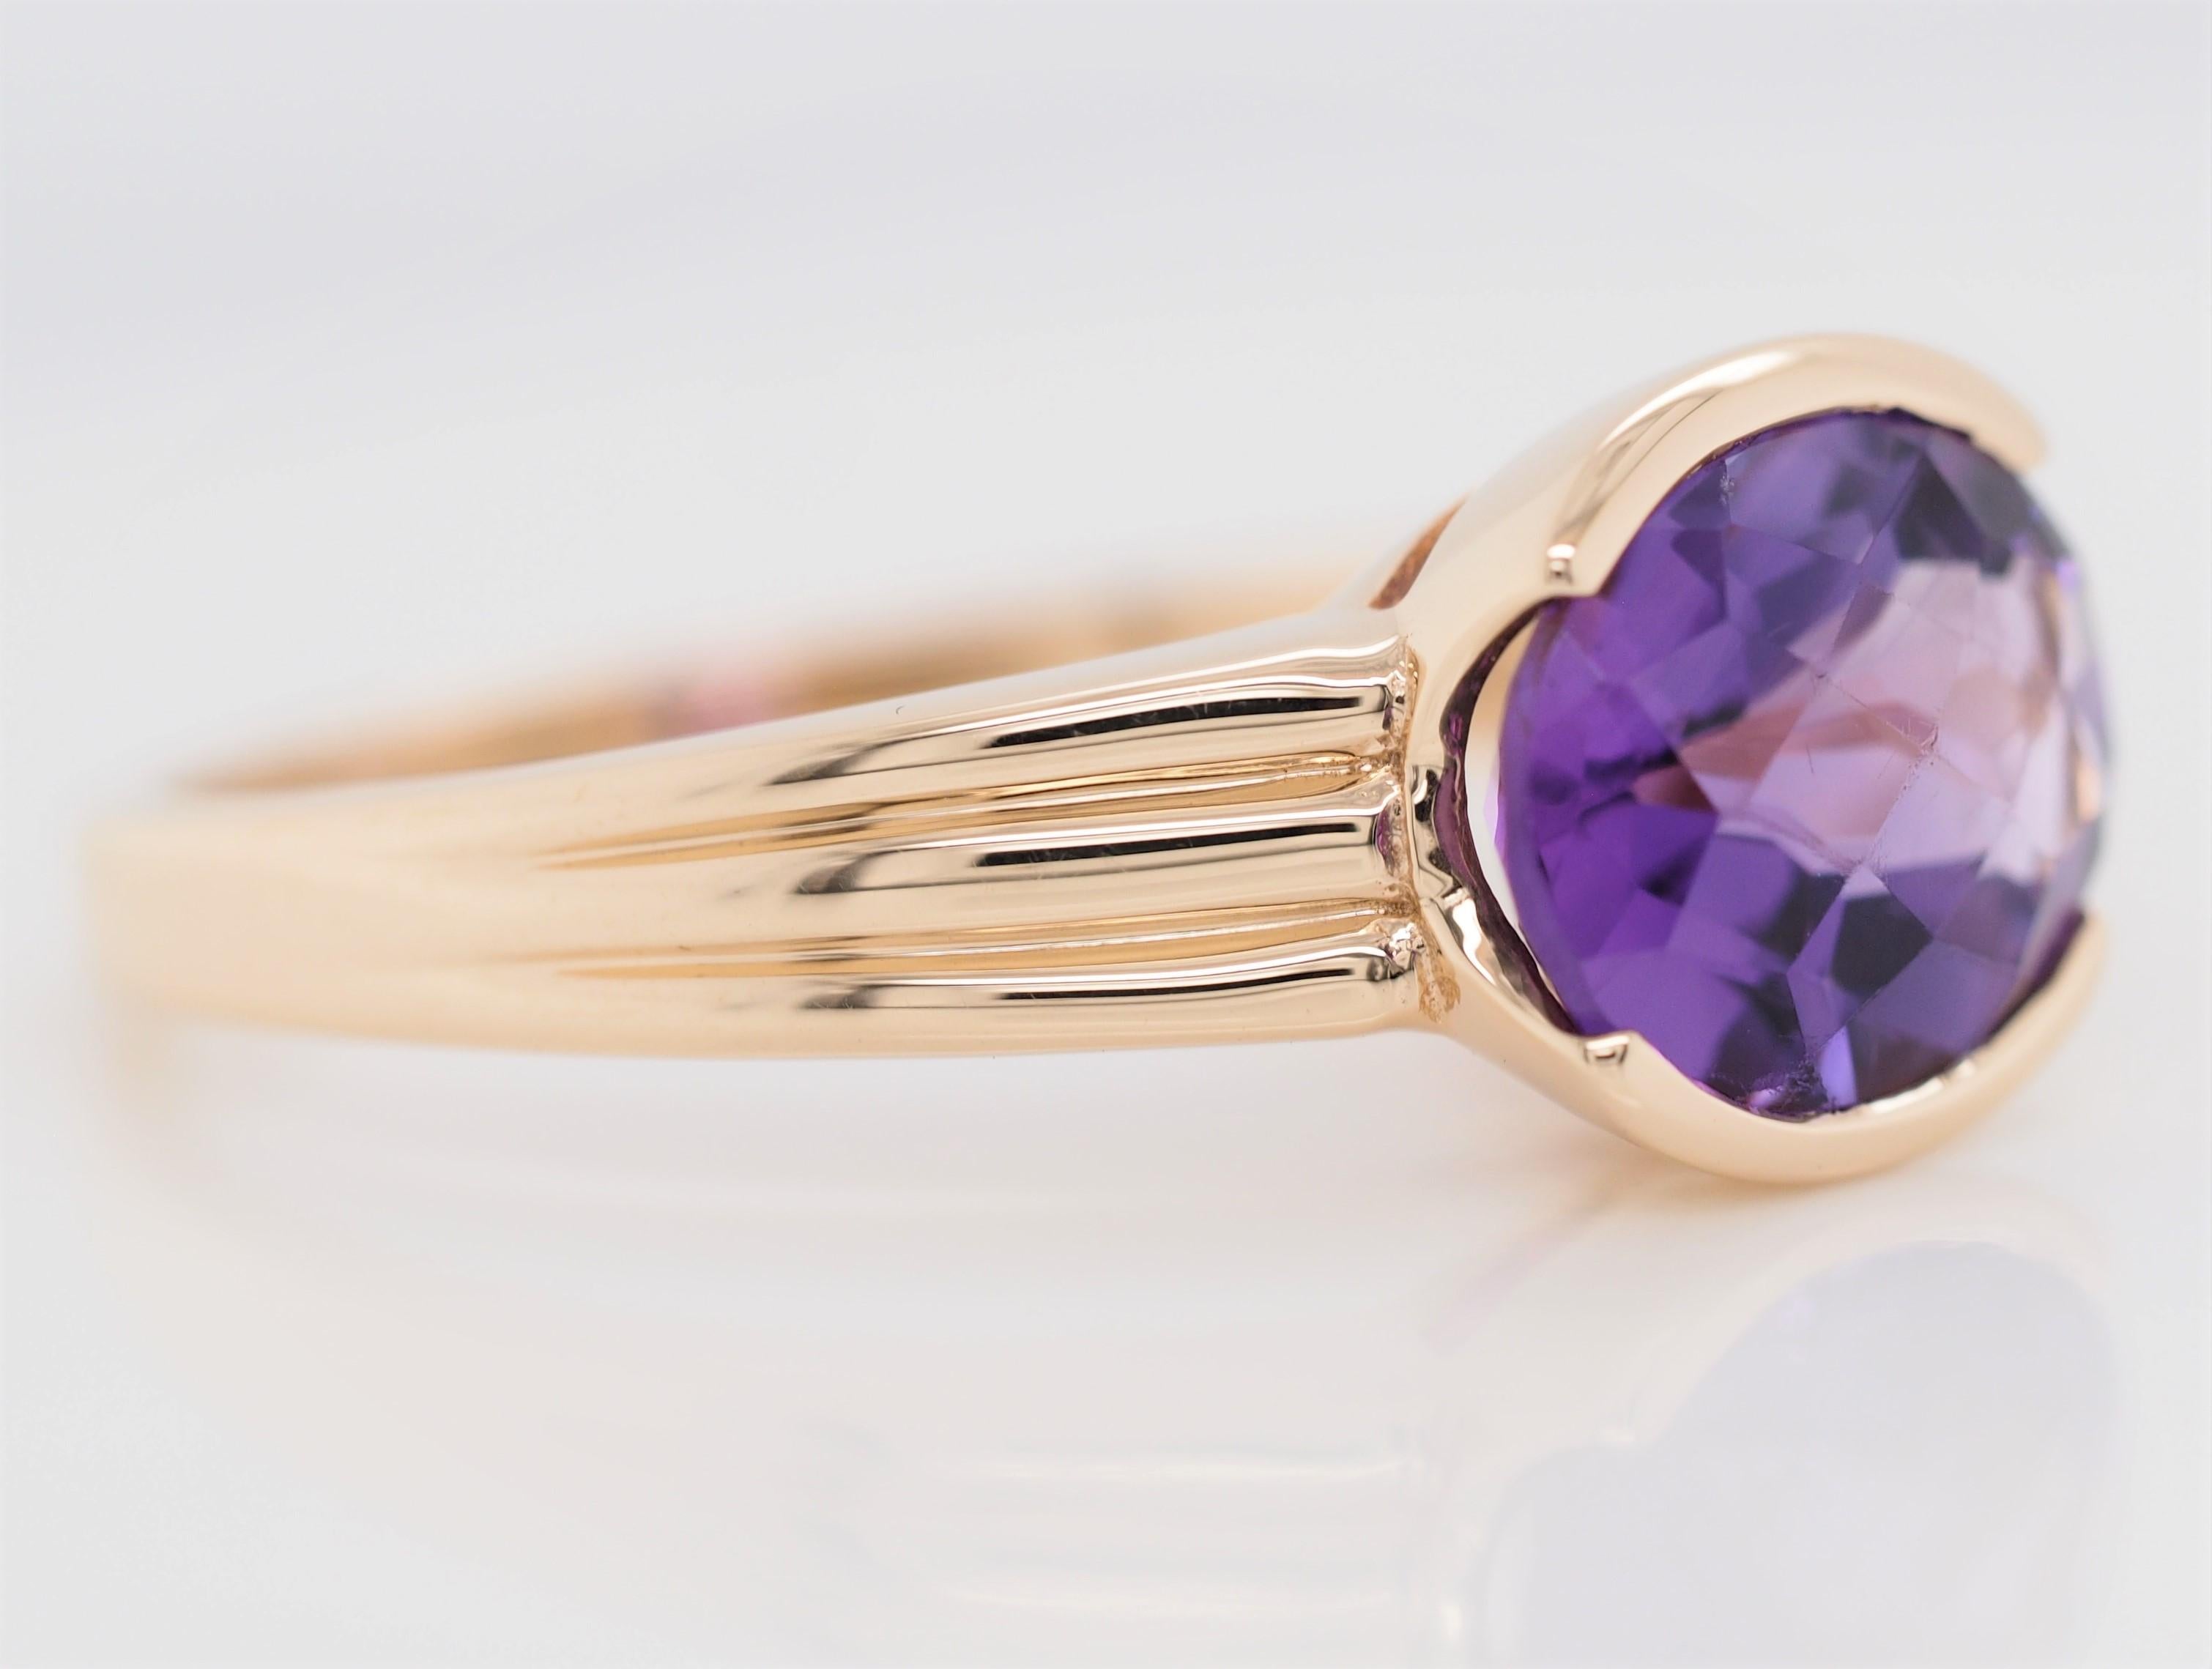 Oval Cut Amethyst 14 Karat Yellow Gold Fashion Ring In Excellent Condition For Sale In Addison, TX